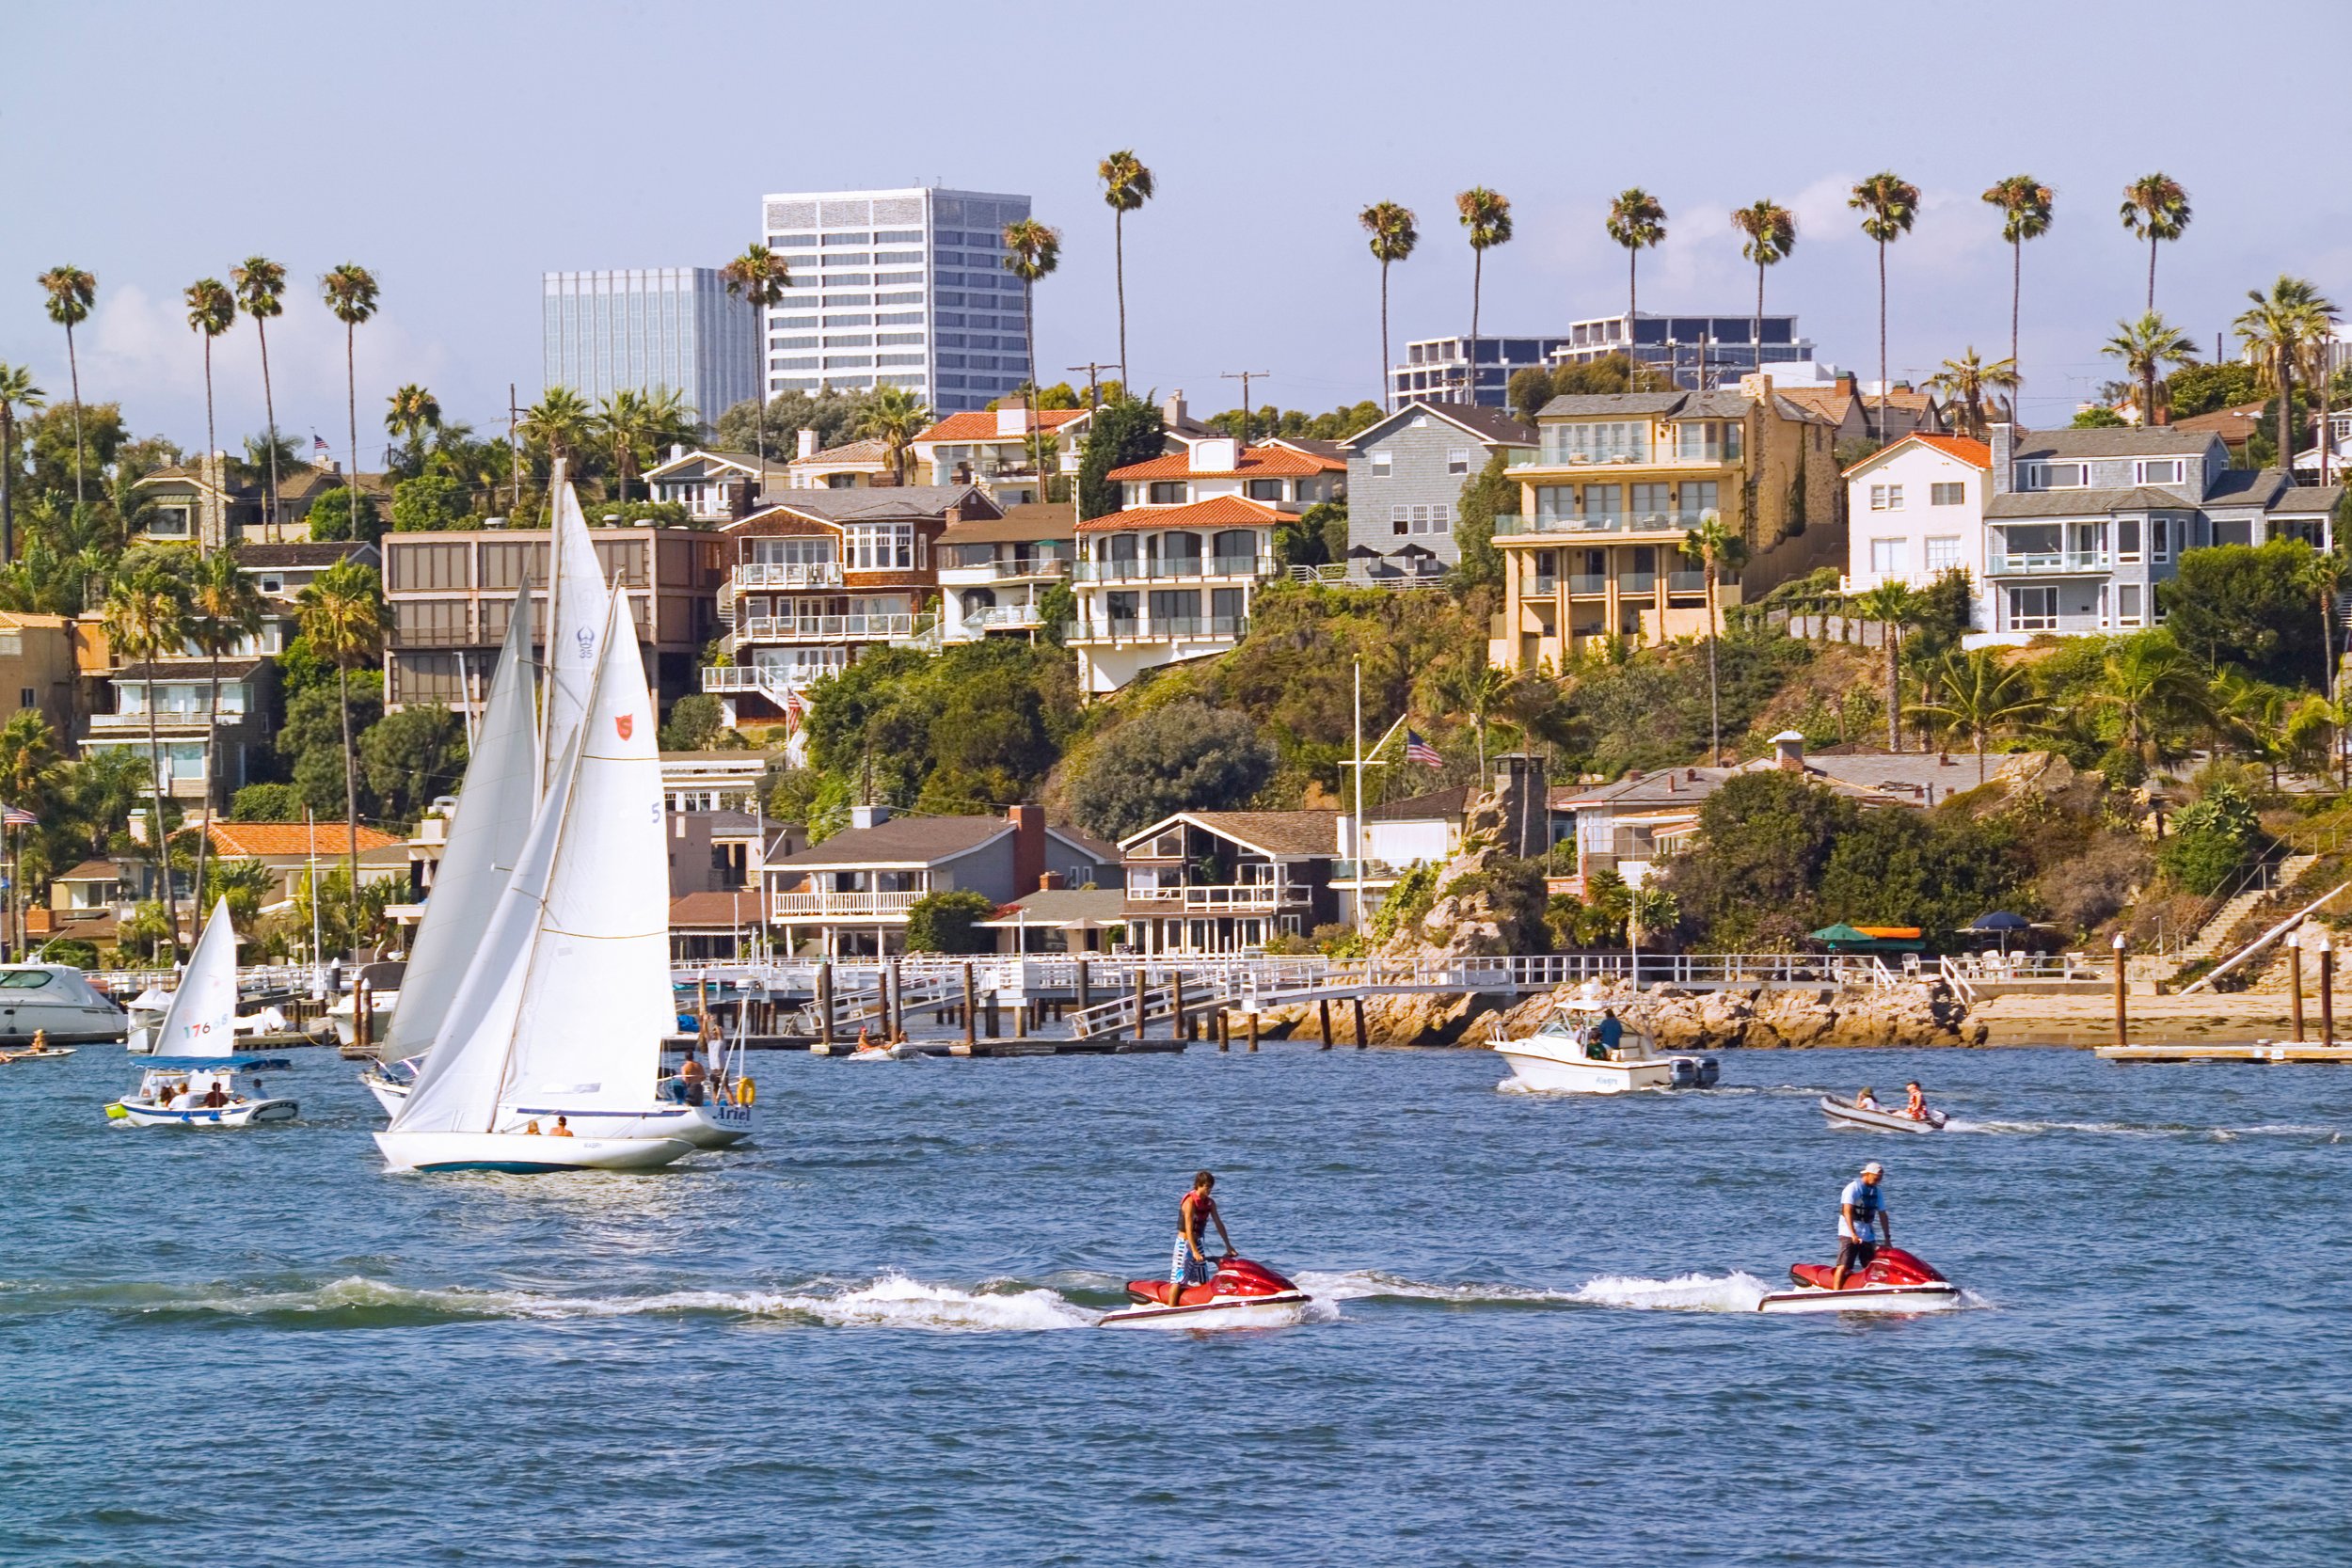  Comparing Hawai‘i to Newport is apples to—well, Orange County. The California town offers a totally different take on the sun-surf-swim agenda, with an emphasis on boho style, boardwalks, bicycling and boating.    Photos courtesy Visit Newport Beach